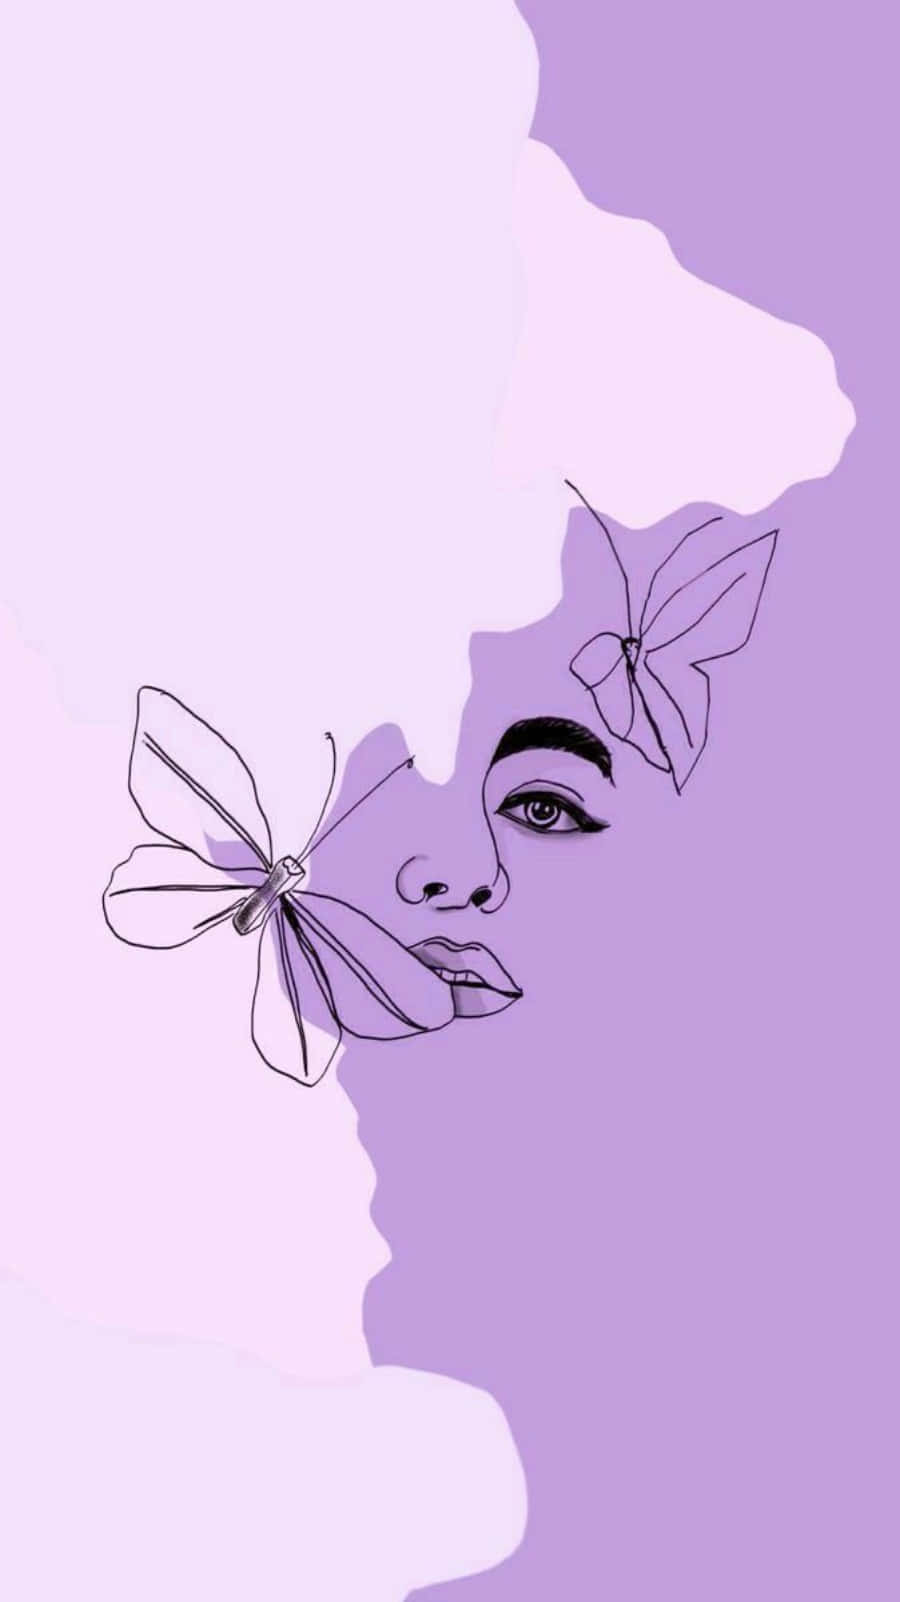 Girly Tumblr Face And Butterflies Background